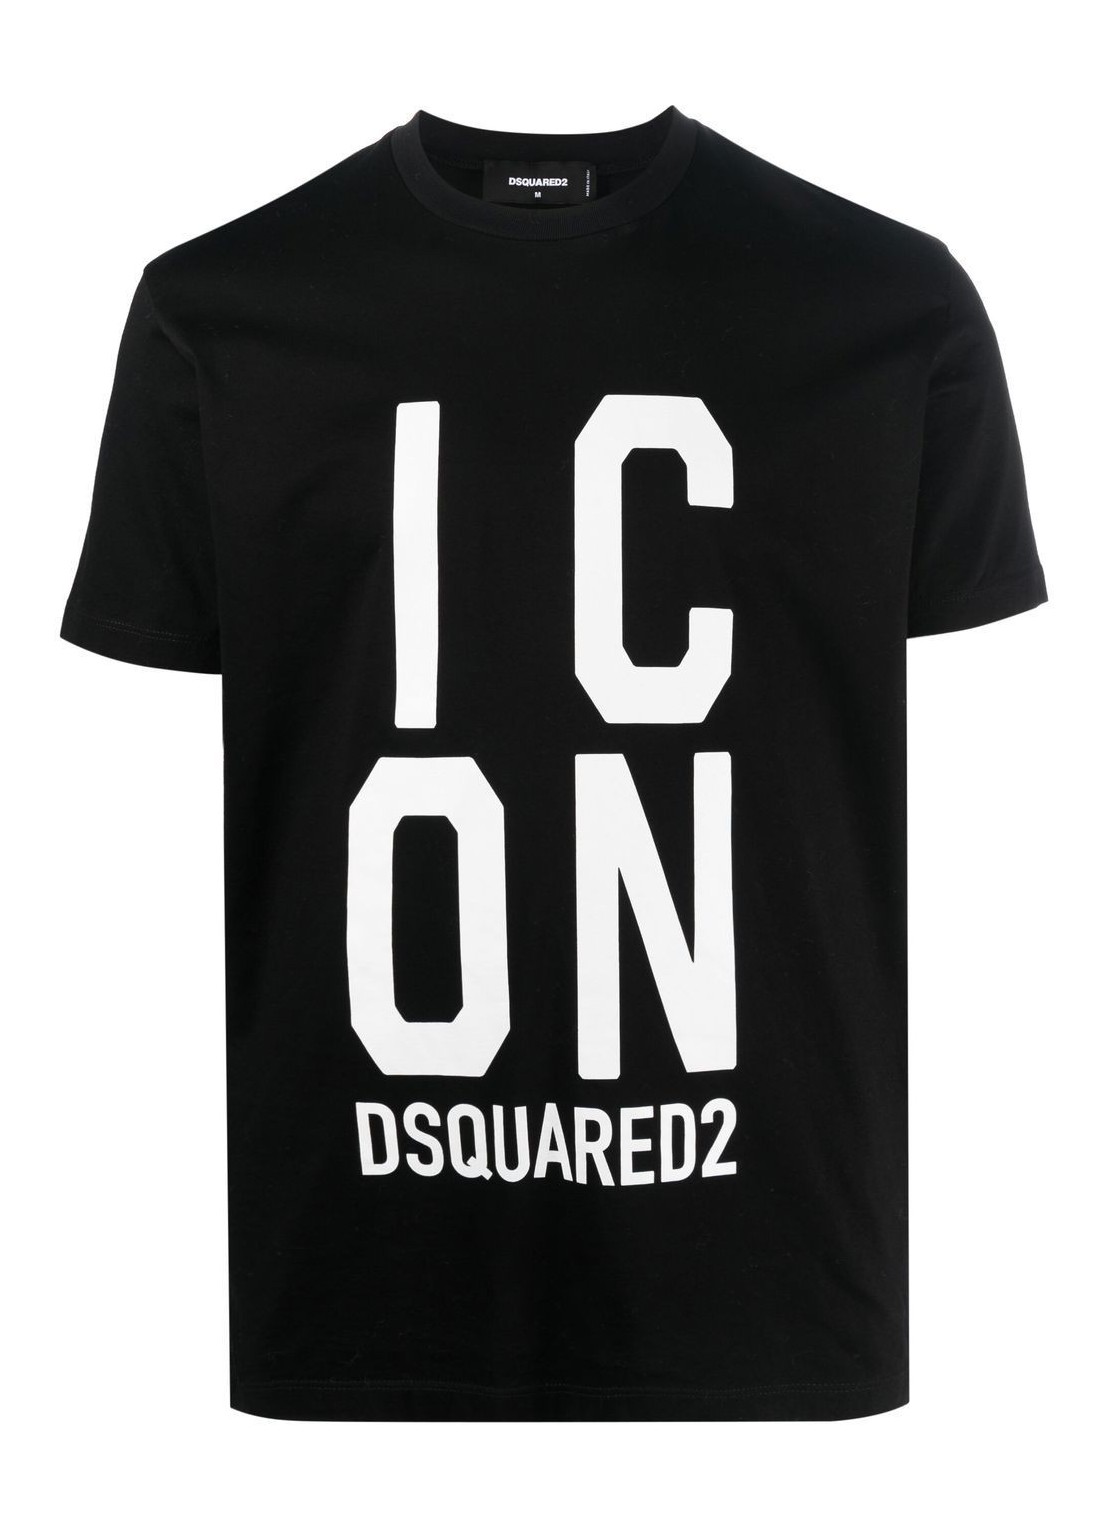 Camiseta dsquared t-shirt man icon squared cool fit tee s79gc0077s23009 900 talla L
 